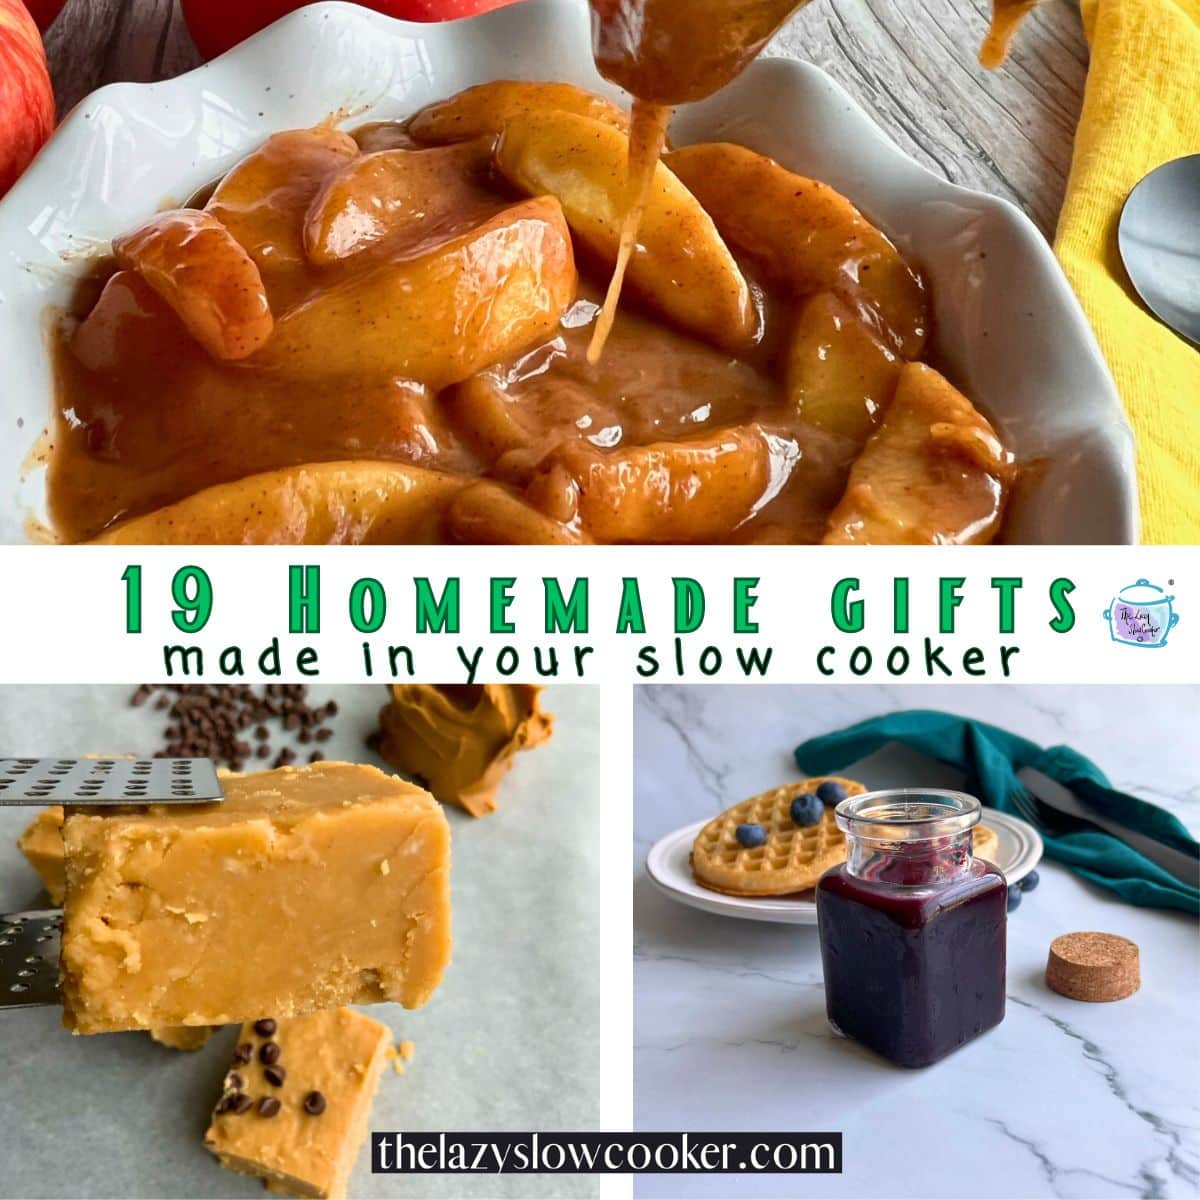 A collage showing three homemade gifts blueberry spread, Caramel apple pie filling and peanut butter fudge